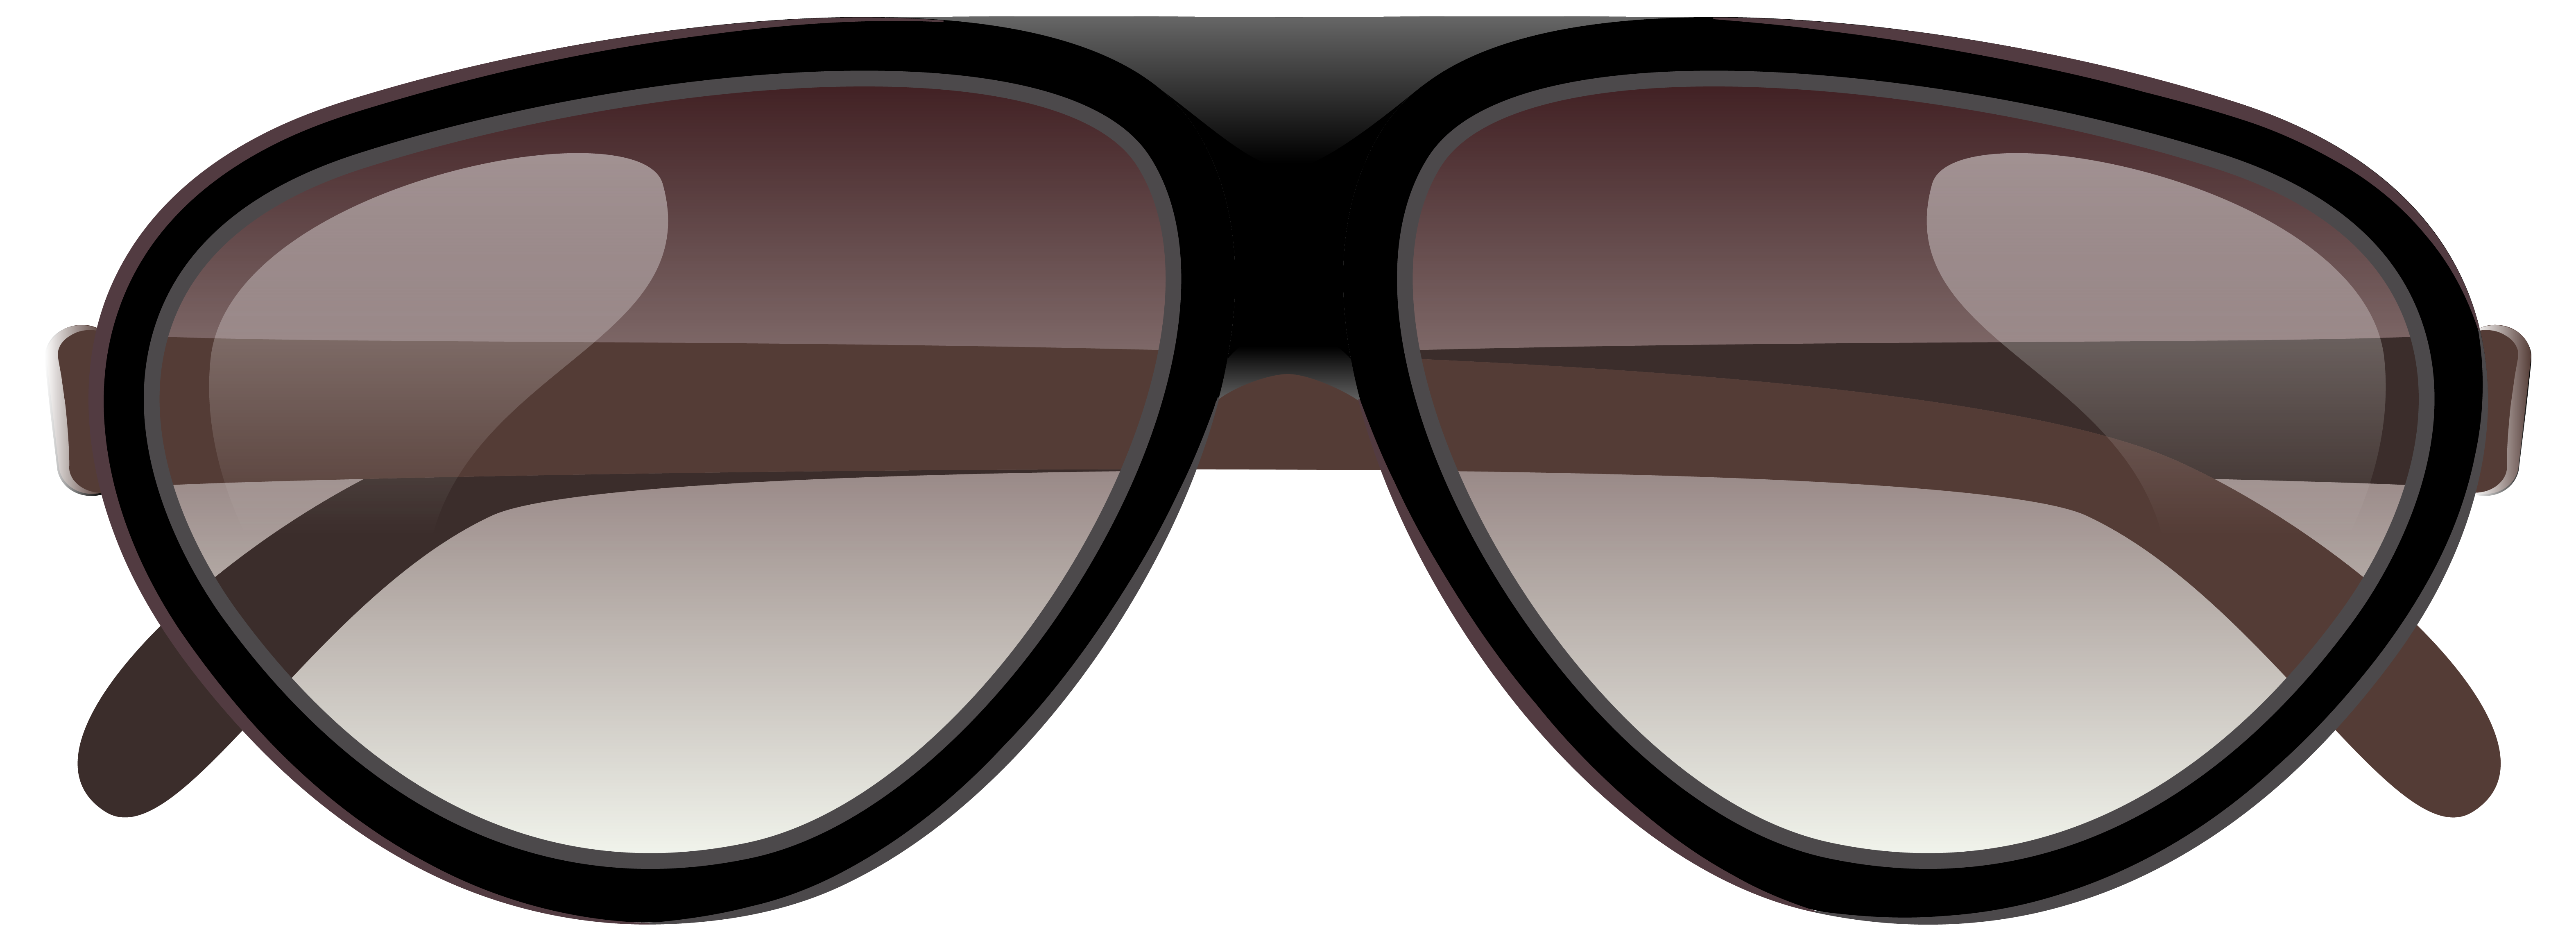 Sunglasses Compression Large File Formats Lossless Clipart